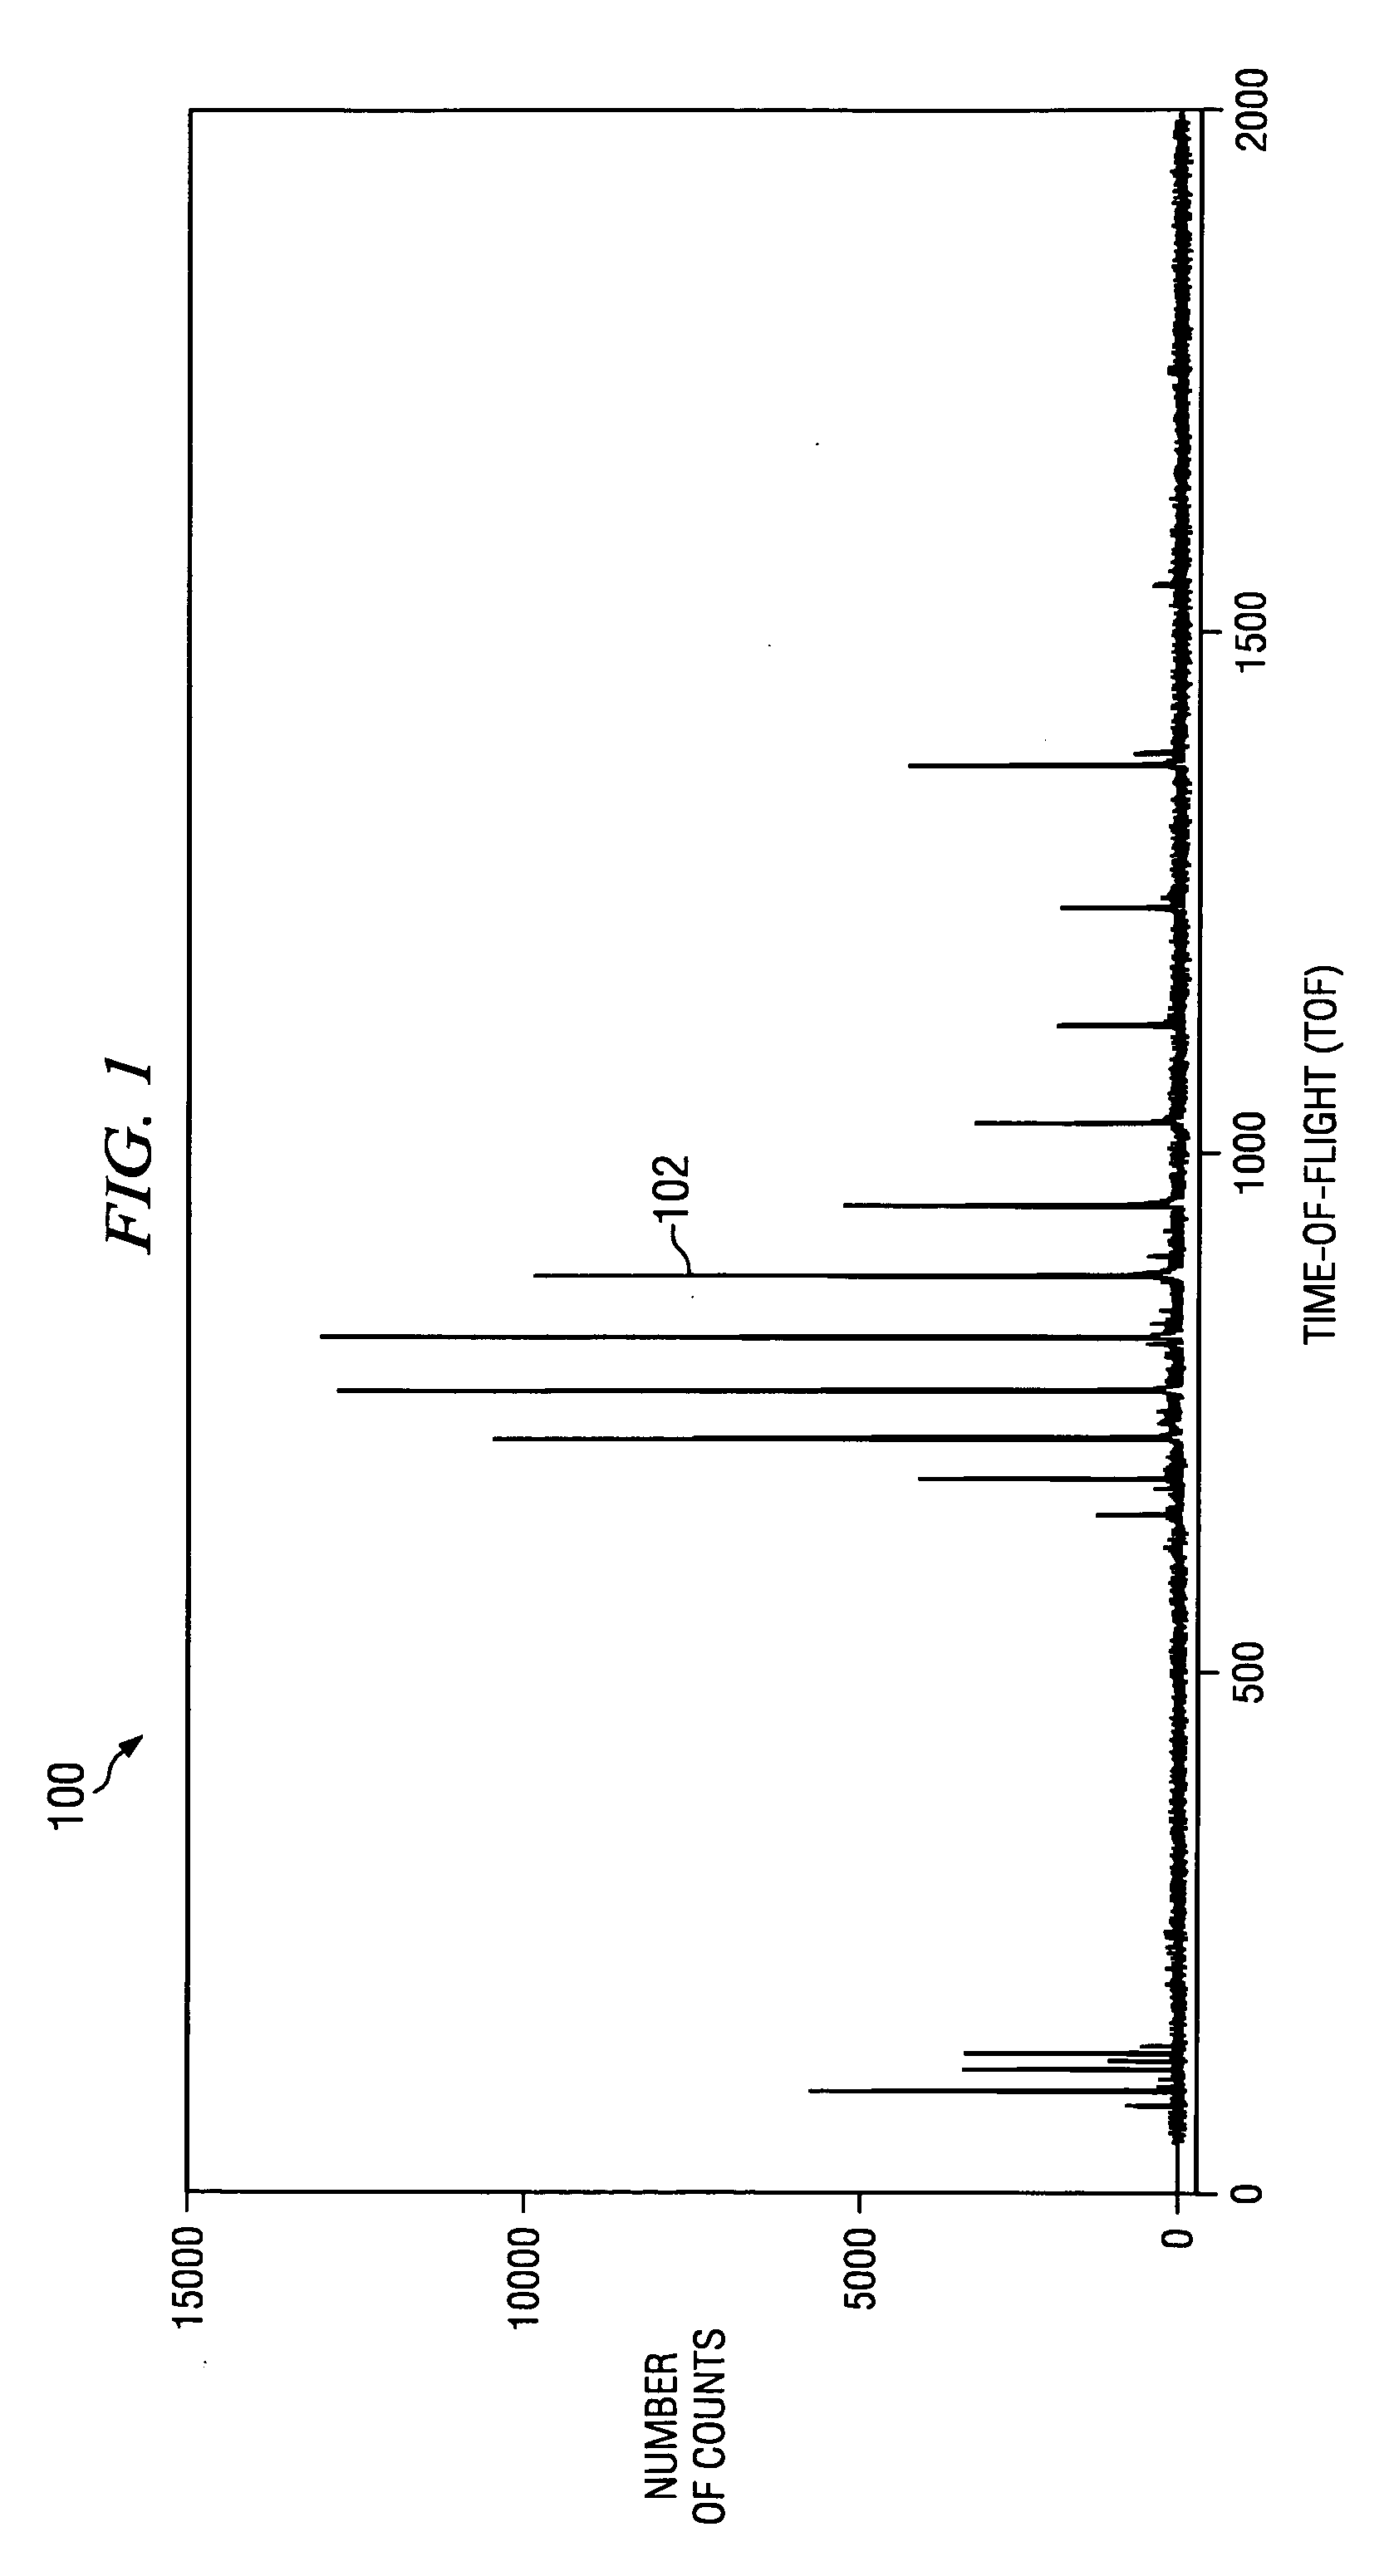 Image processing of mass spectrometry data for using at multiple resolutions